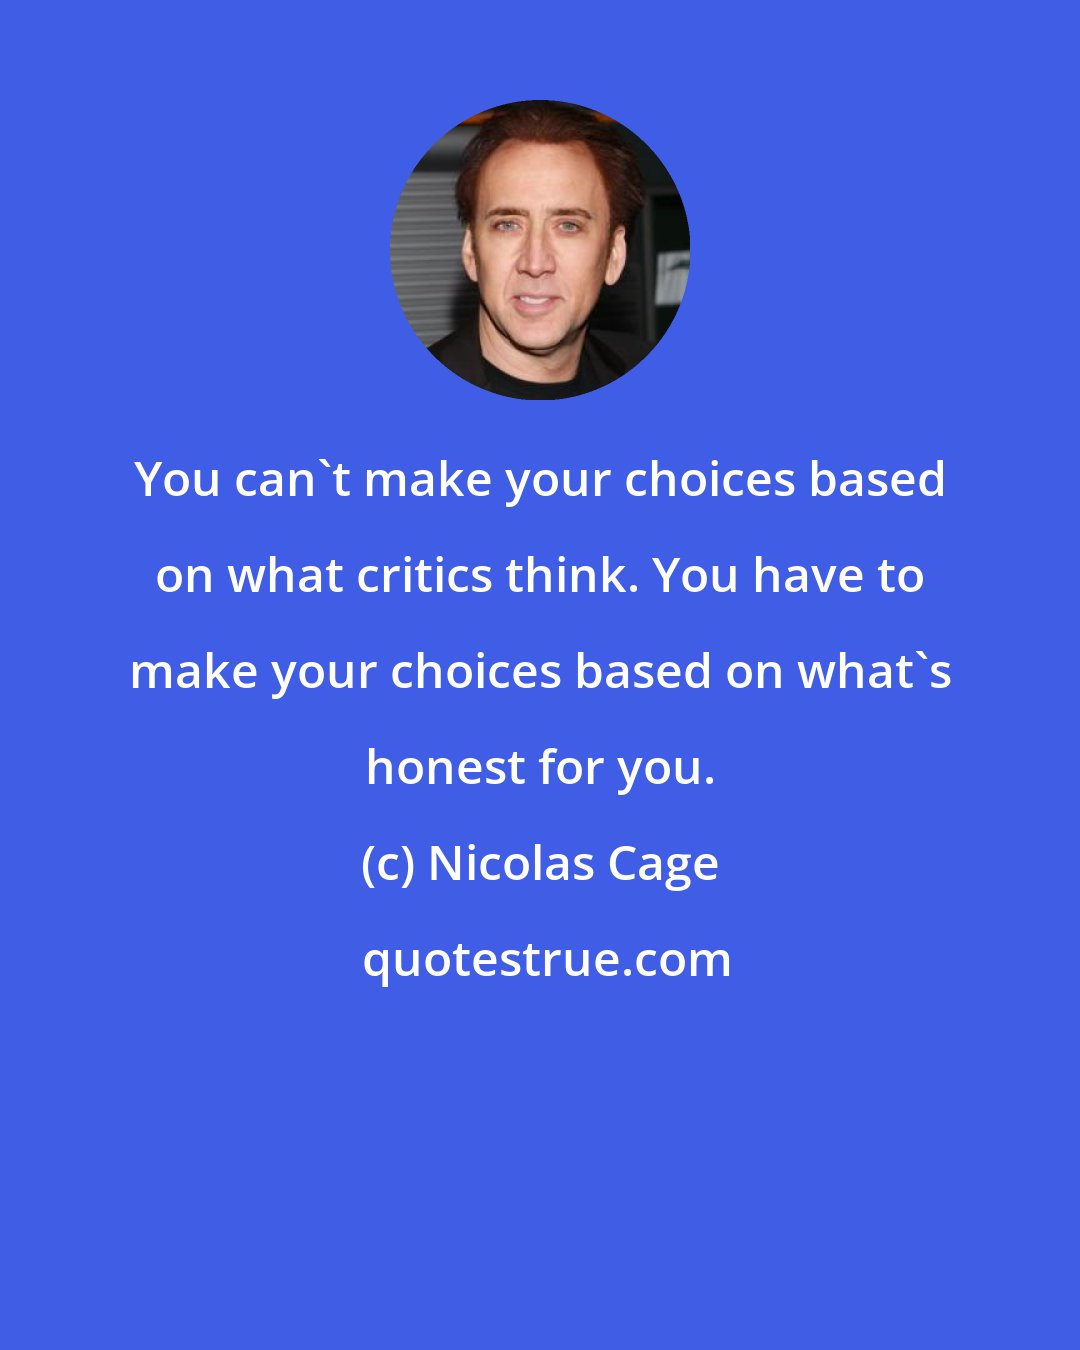 Nicolas Cage: You can't make your choices based on what critics think. You have to make your choices based on what's honest for you.